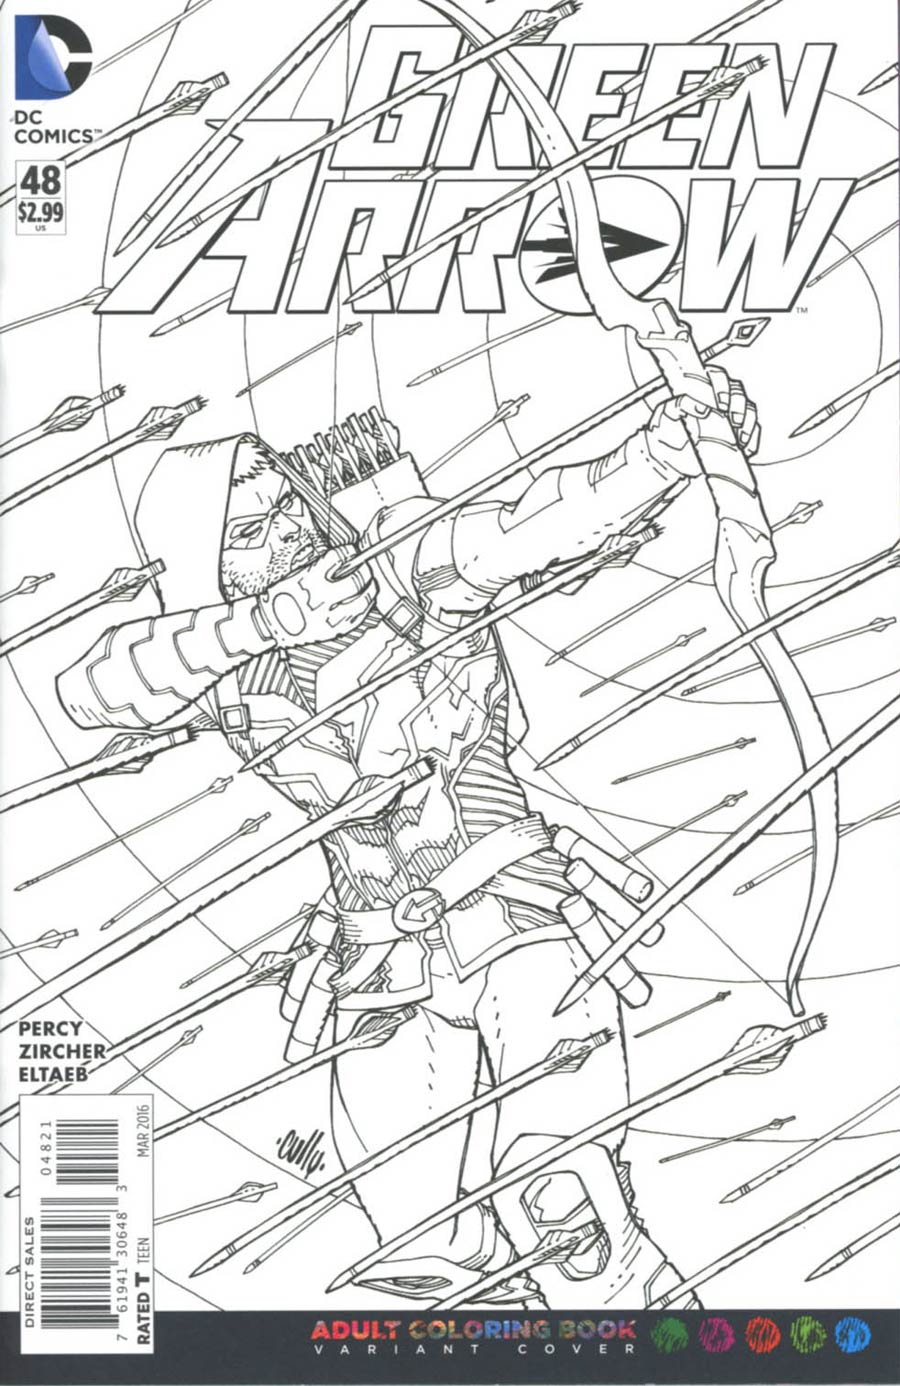 Green Arrow Vol 6 #48 Cover B Variant Cully Hamner Adult Coloring Book Cover